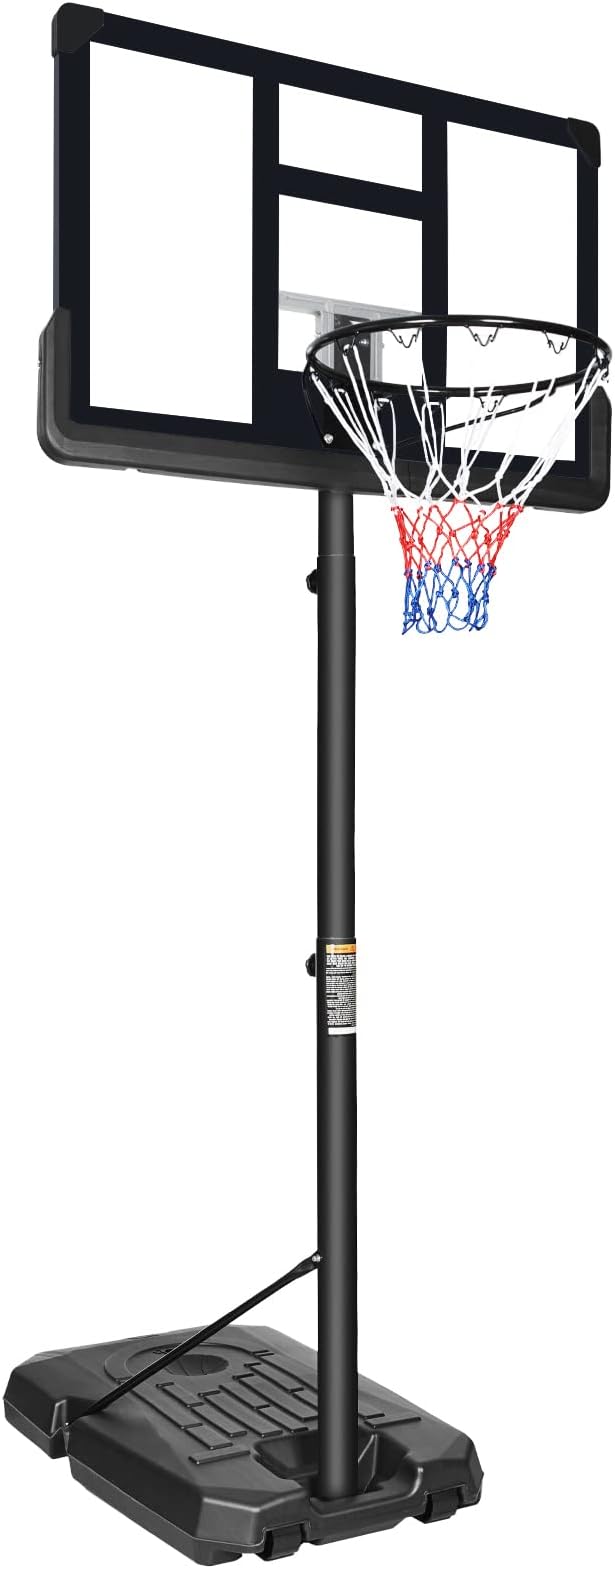 aokung youth height adjustable 6 5 to 10 basketball hoop 44 backboard portable basketball goal system 